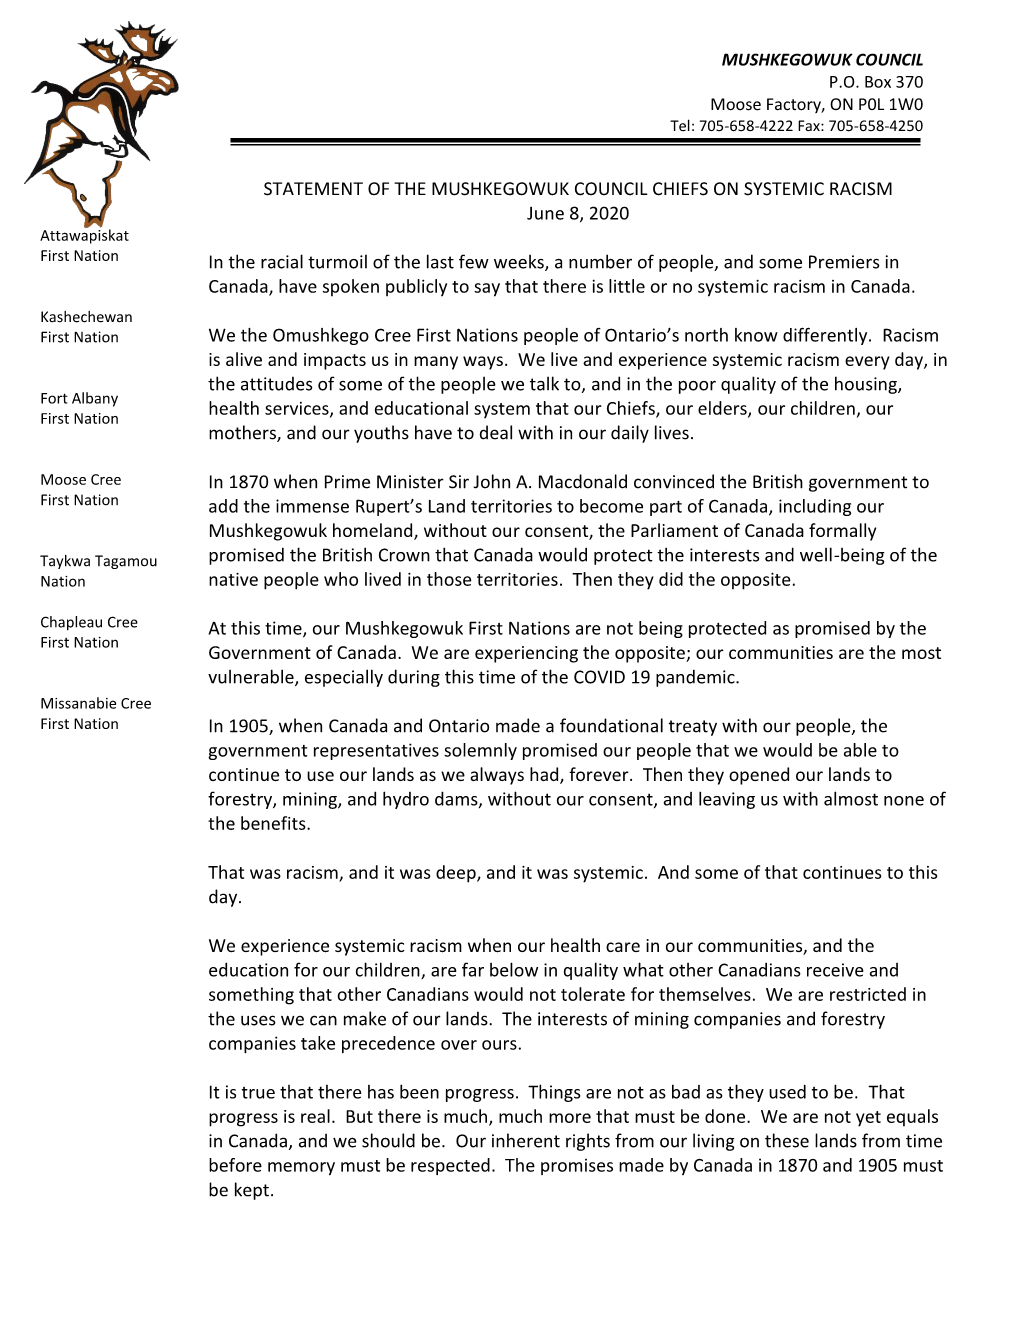 Statement of the Mushkegowuk Council